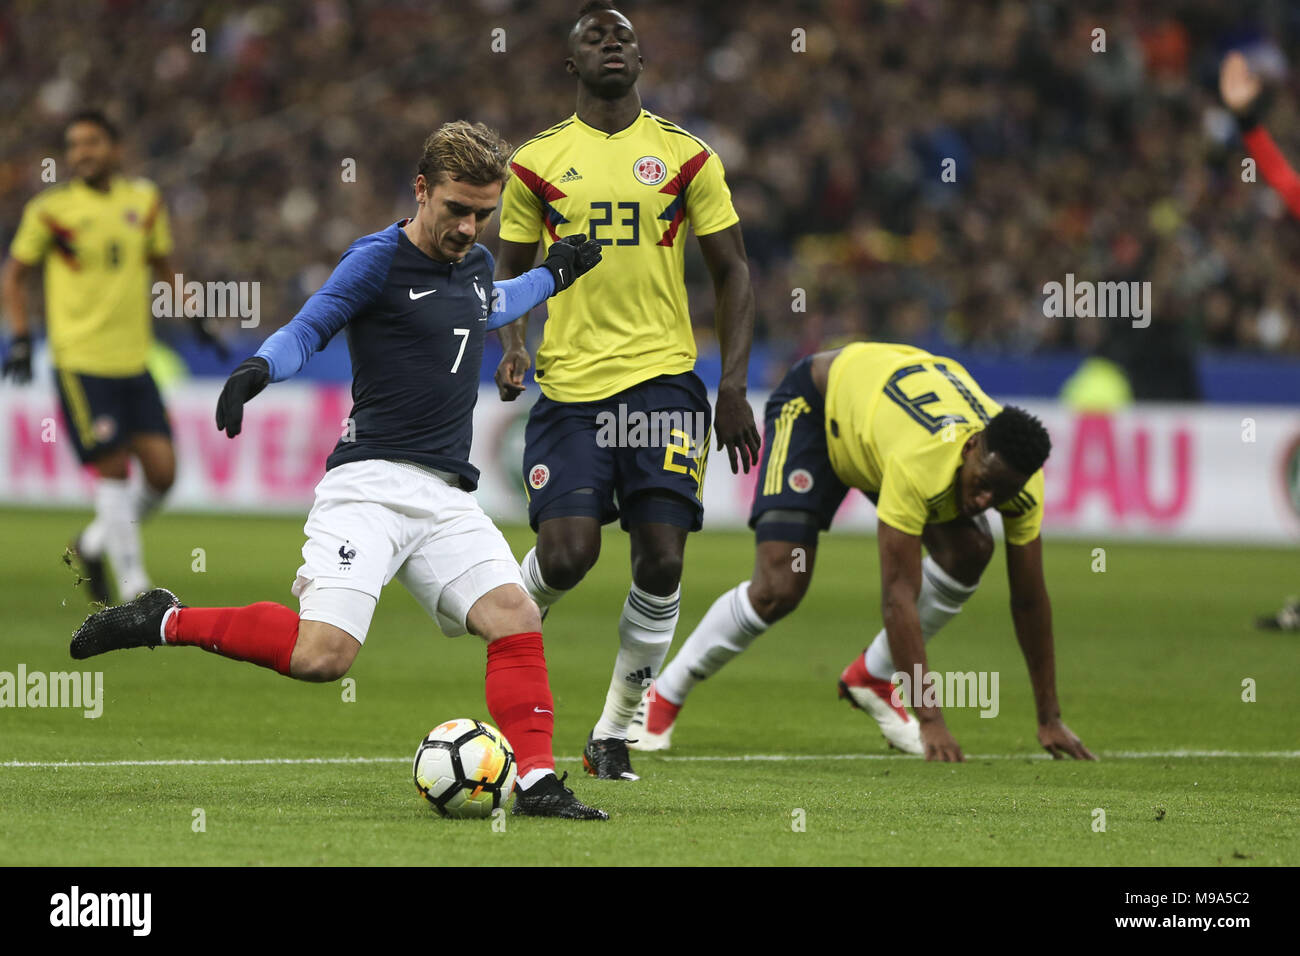 March 23, 2018 - Antoine Griezmann 7; during the friendly football match  between France and Colombia at the Stade de France, in Saint-Denis, on the  outskirts of Paris, on March 23, 2018.